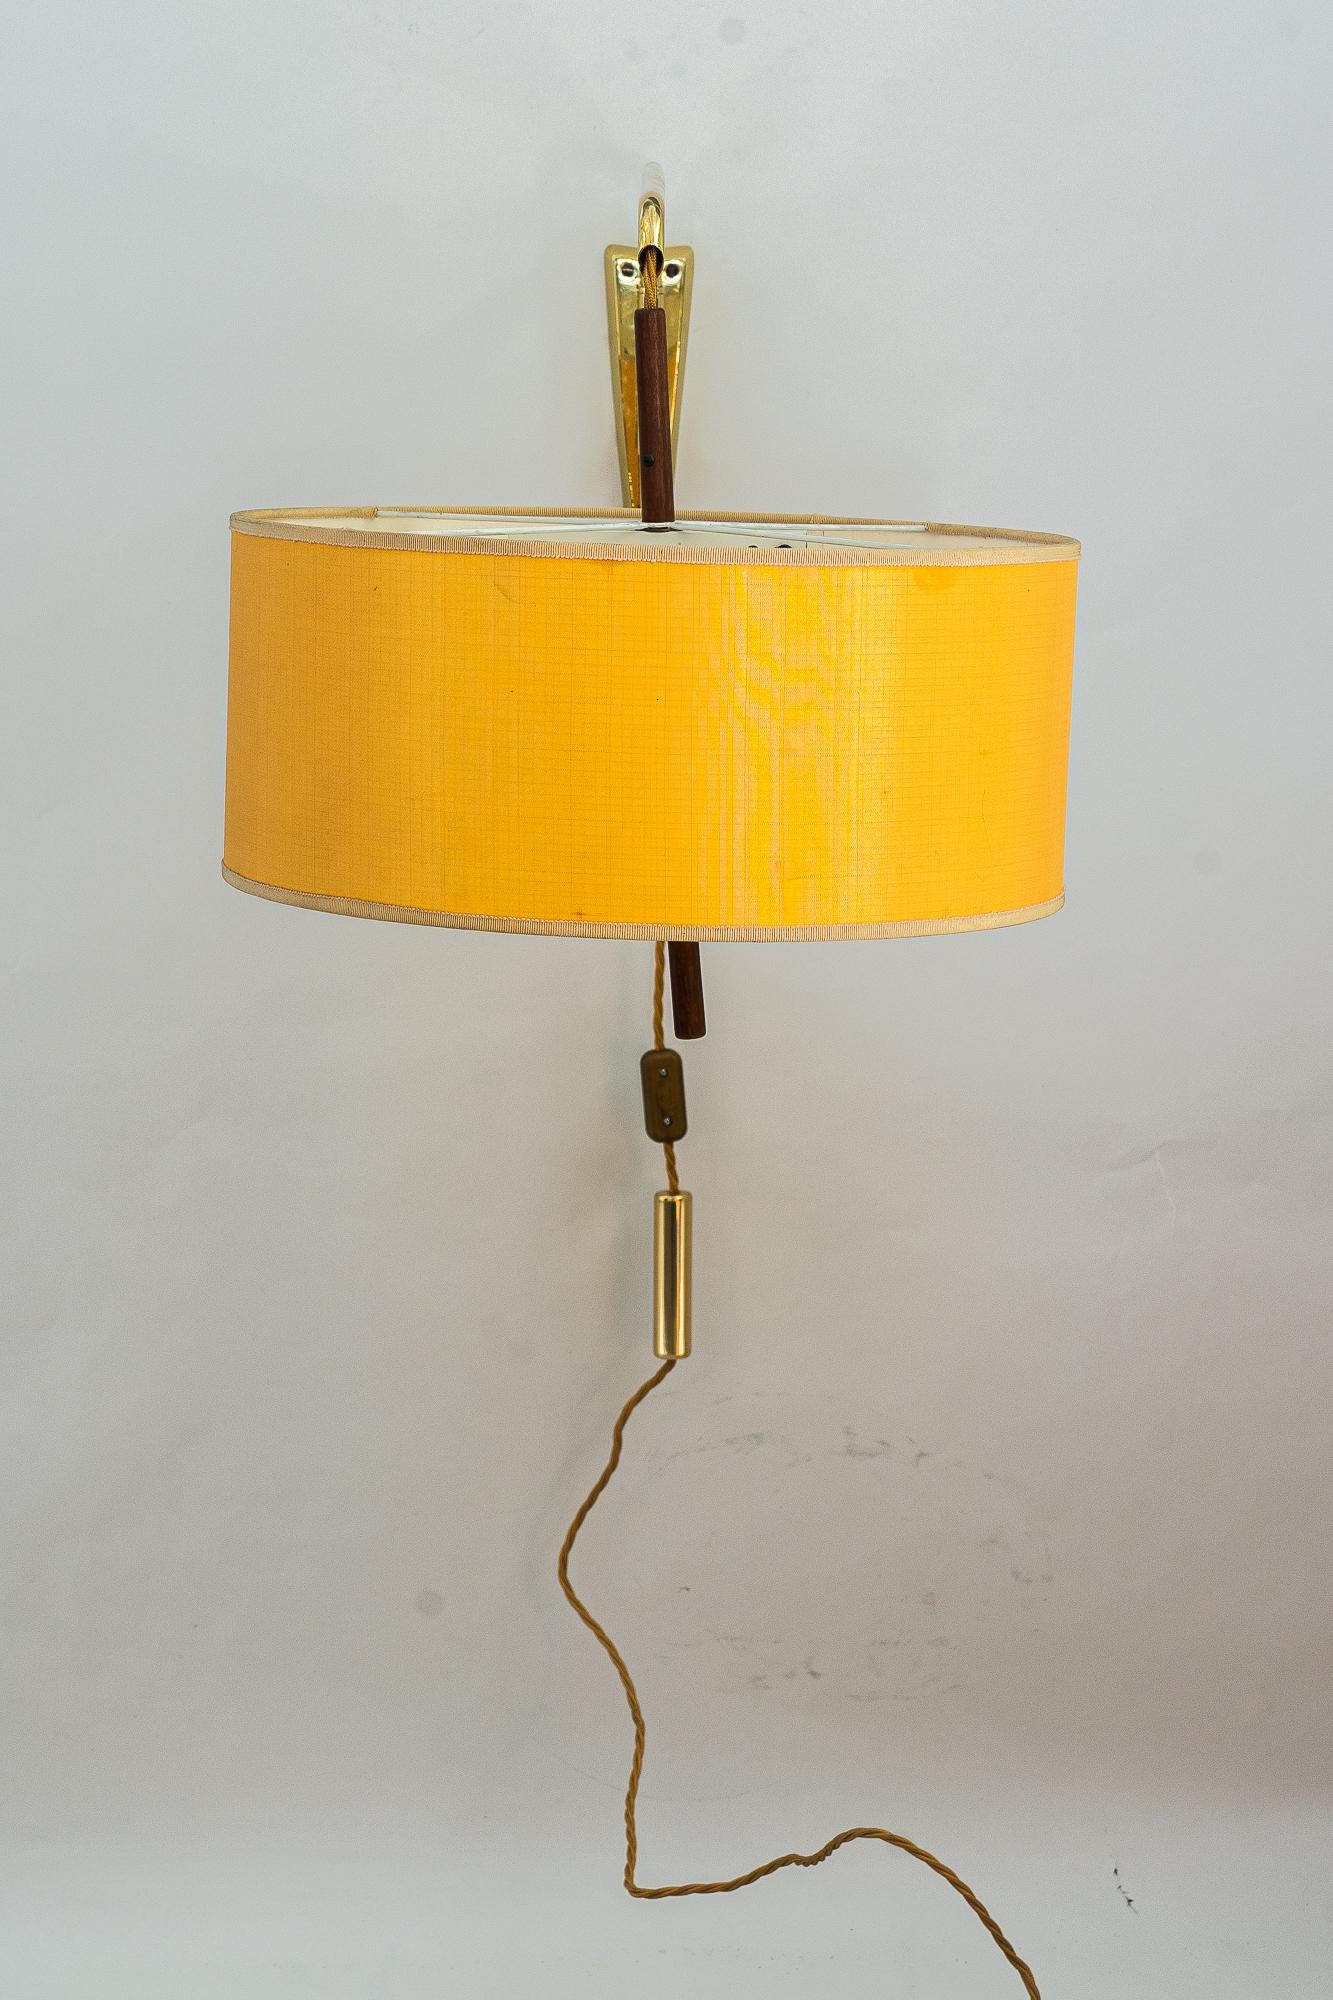 Adjustable big J.T.Kalmar wall lamp with original shade around 1950s
Hight adjustable from 44cm - 72cm
Wide: 40cm
Deep: 92cm

Brass, wood and fabric.
Original fabric shade
Original condition
Wire is replaced (new).